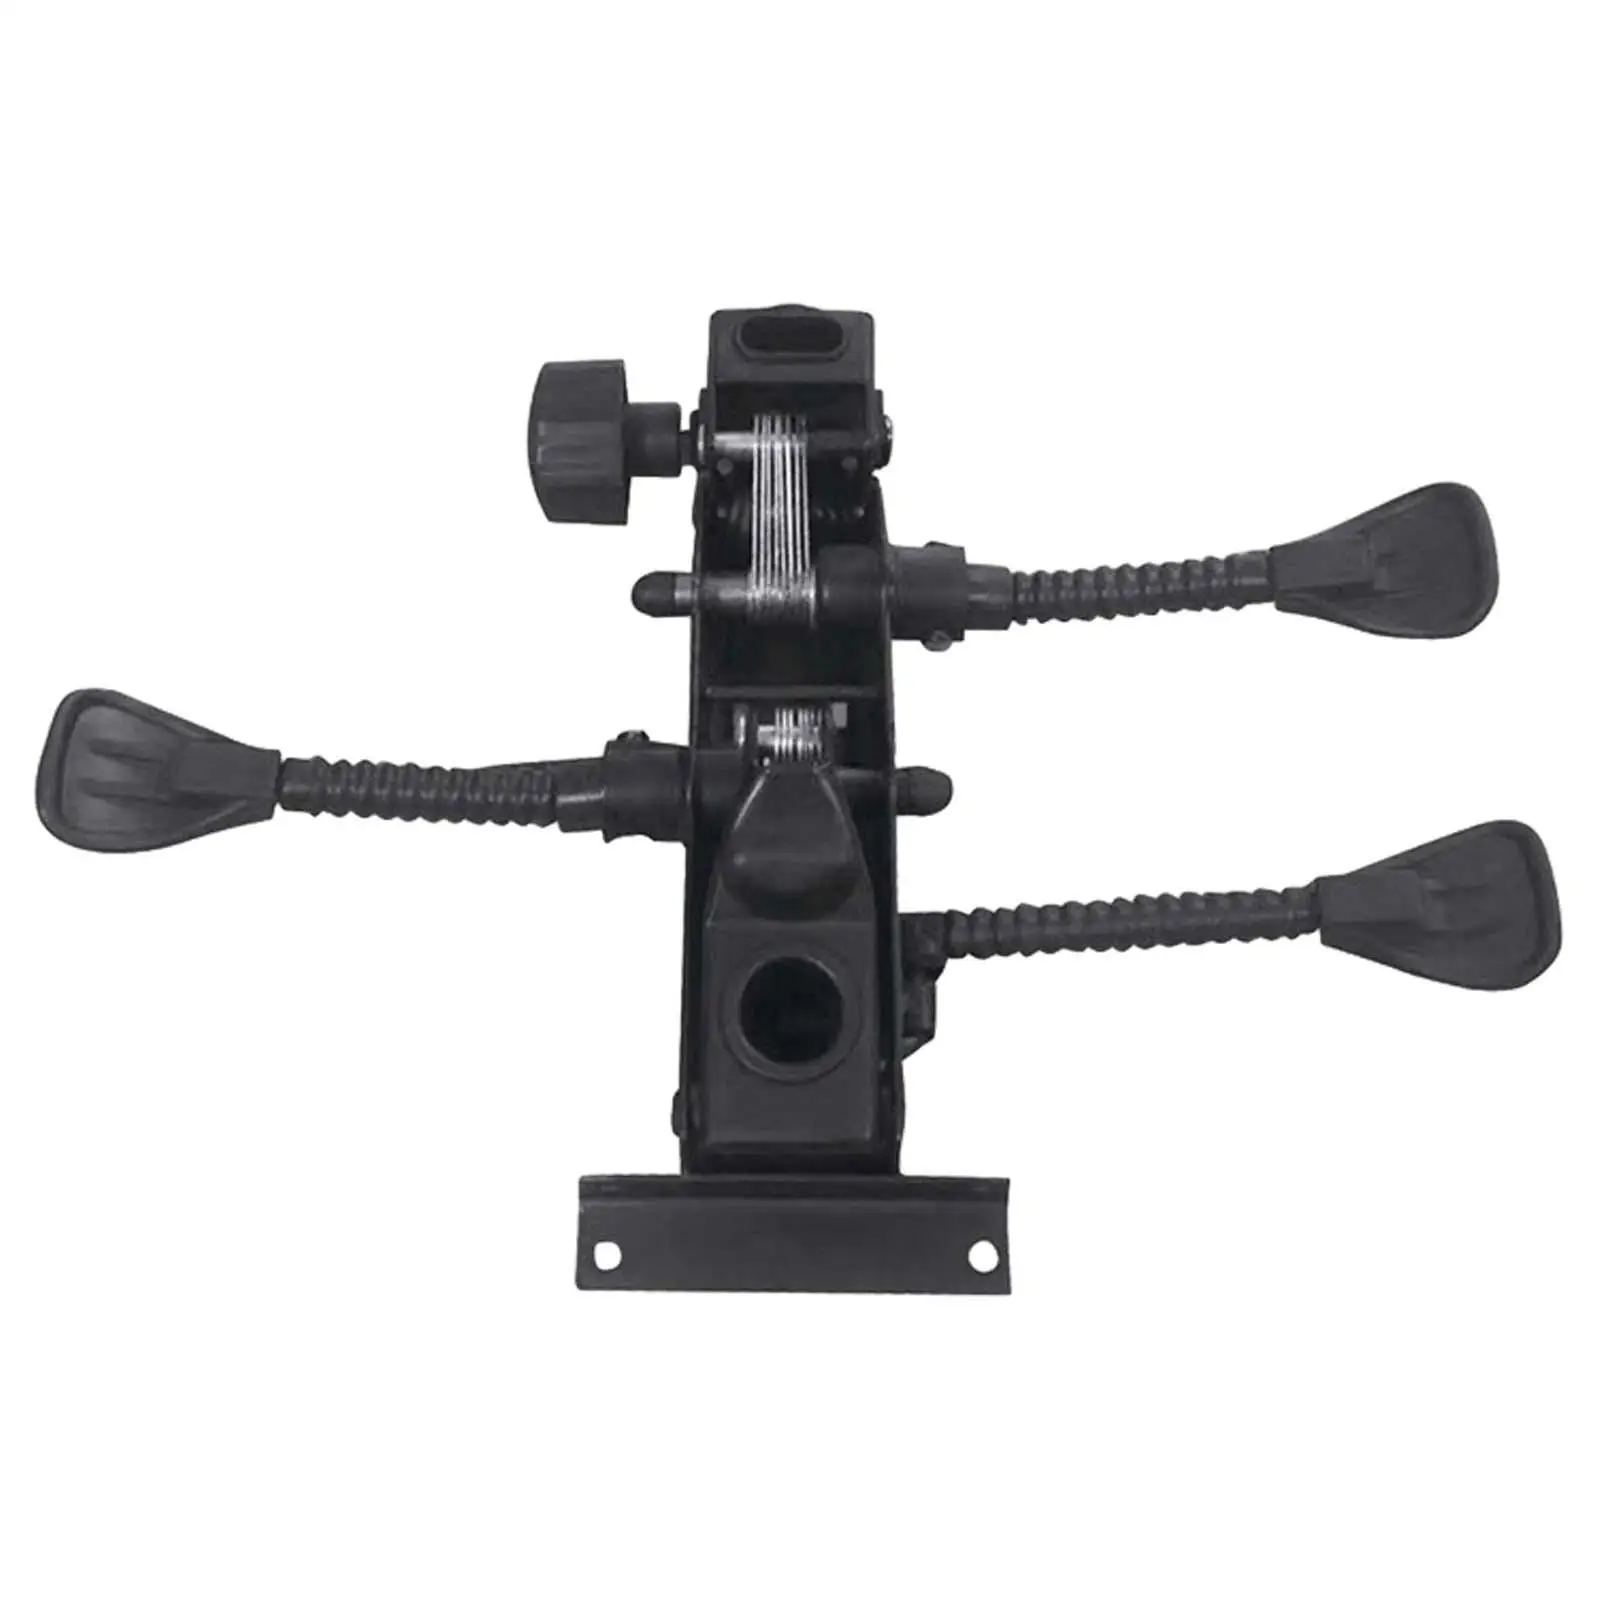 Replacement Office Chair Tilt and Lock Lever Base Plate Office Chair Tilt Control Mechanism for Mesh Chair Furniture Bar Stool